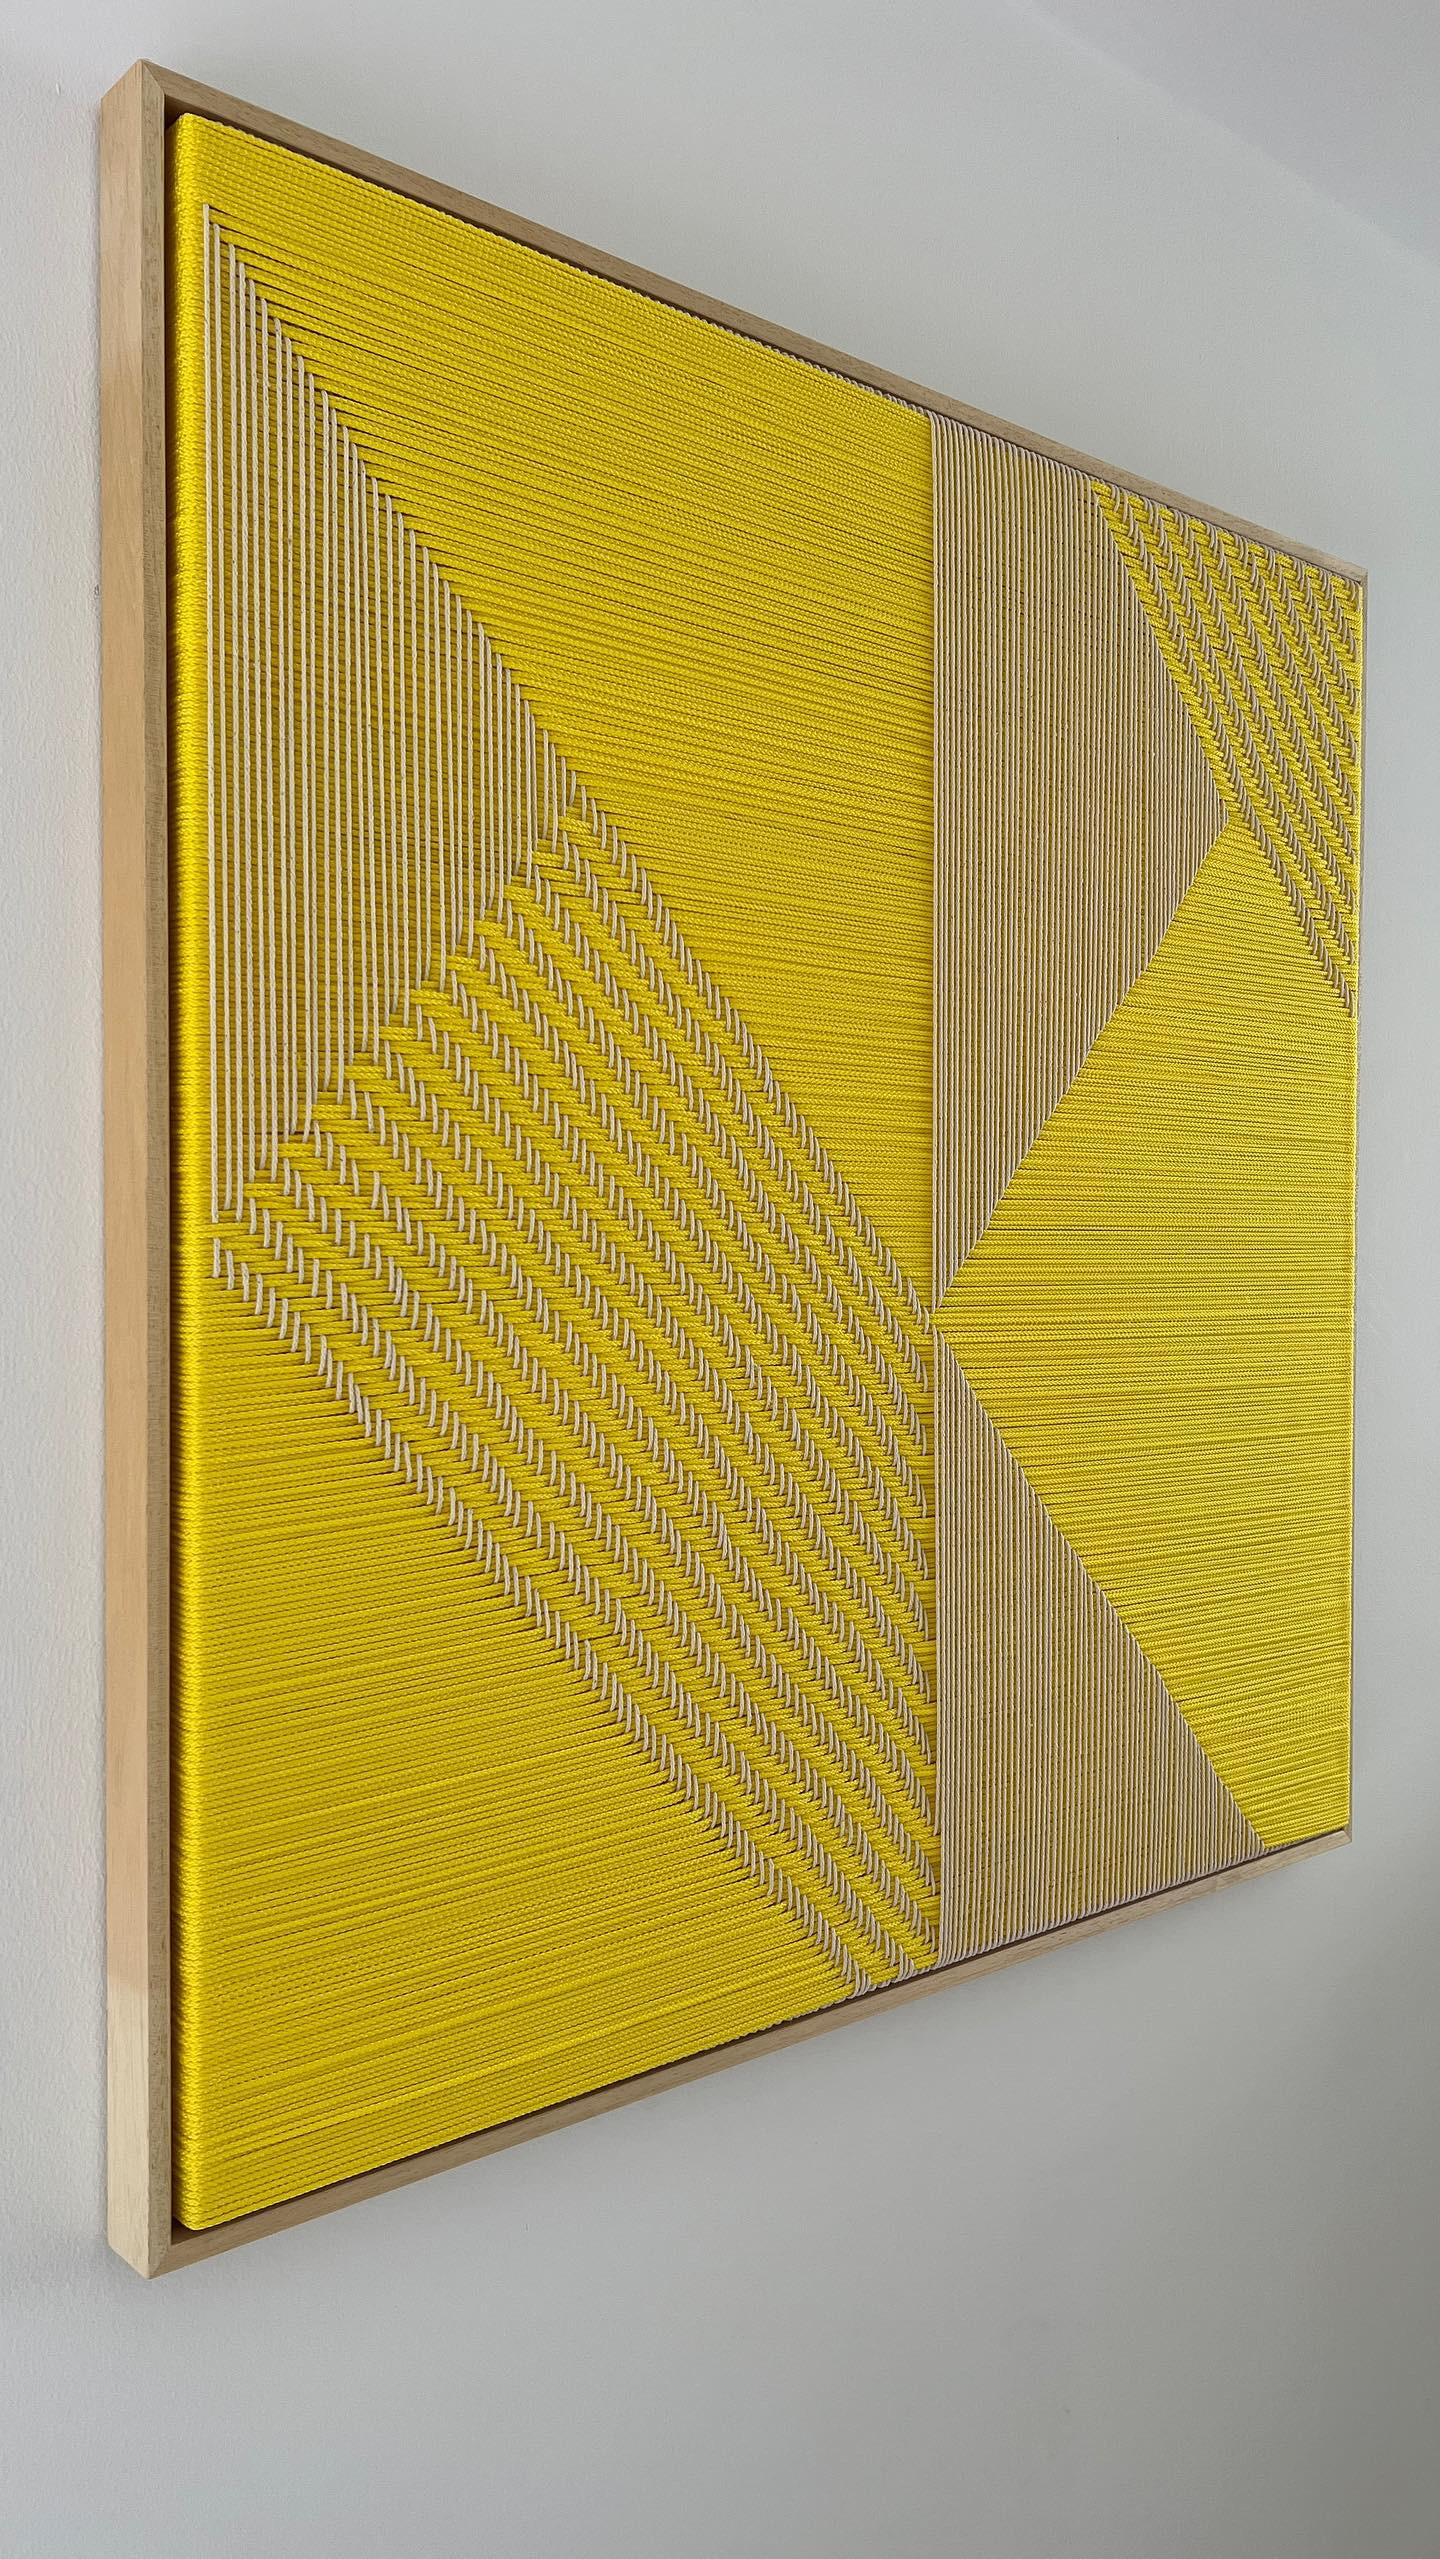 Grid Yellow
Textile Art, Cotton, Handmade
Free style weaving
80x80cm
2023

About the artist

Matthias De Vogel

The Textile art studio Fault Lines is Founded in 2015 by Matthias de Vogel. Matthias lived and worked for several years in Paris and San